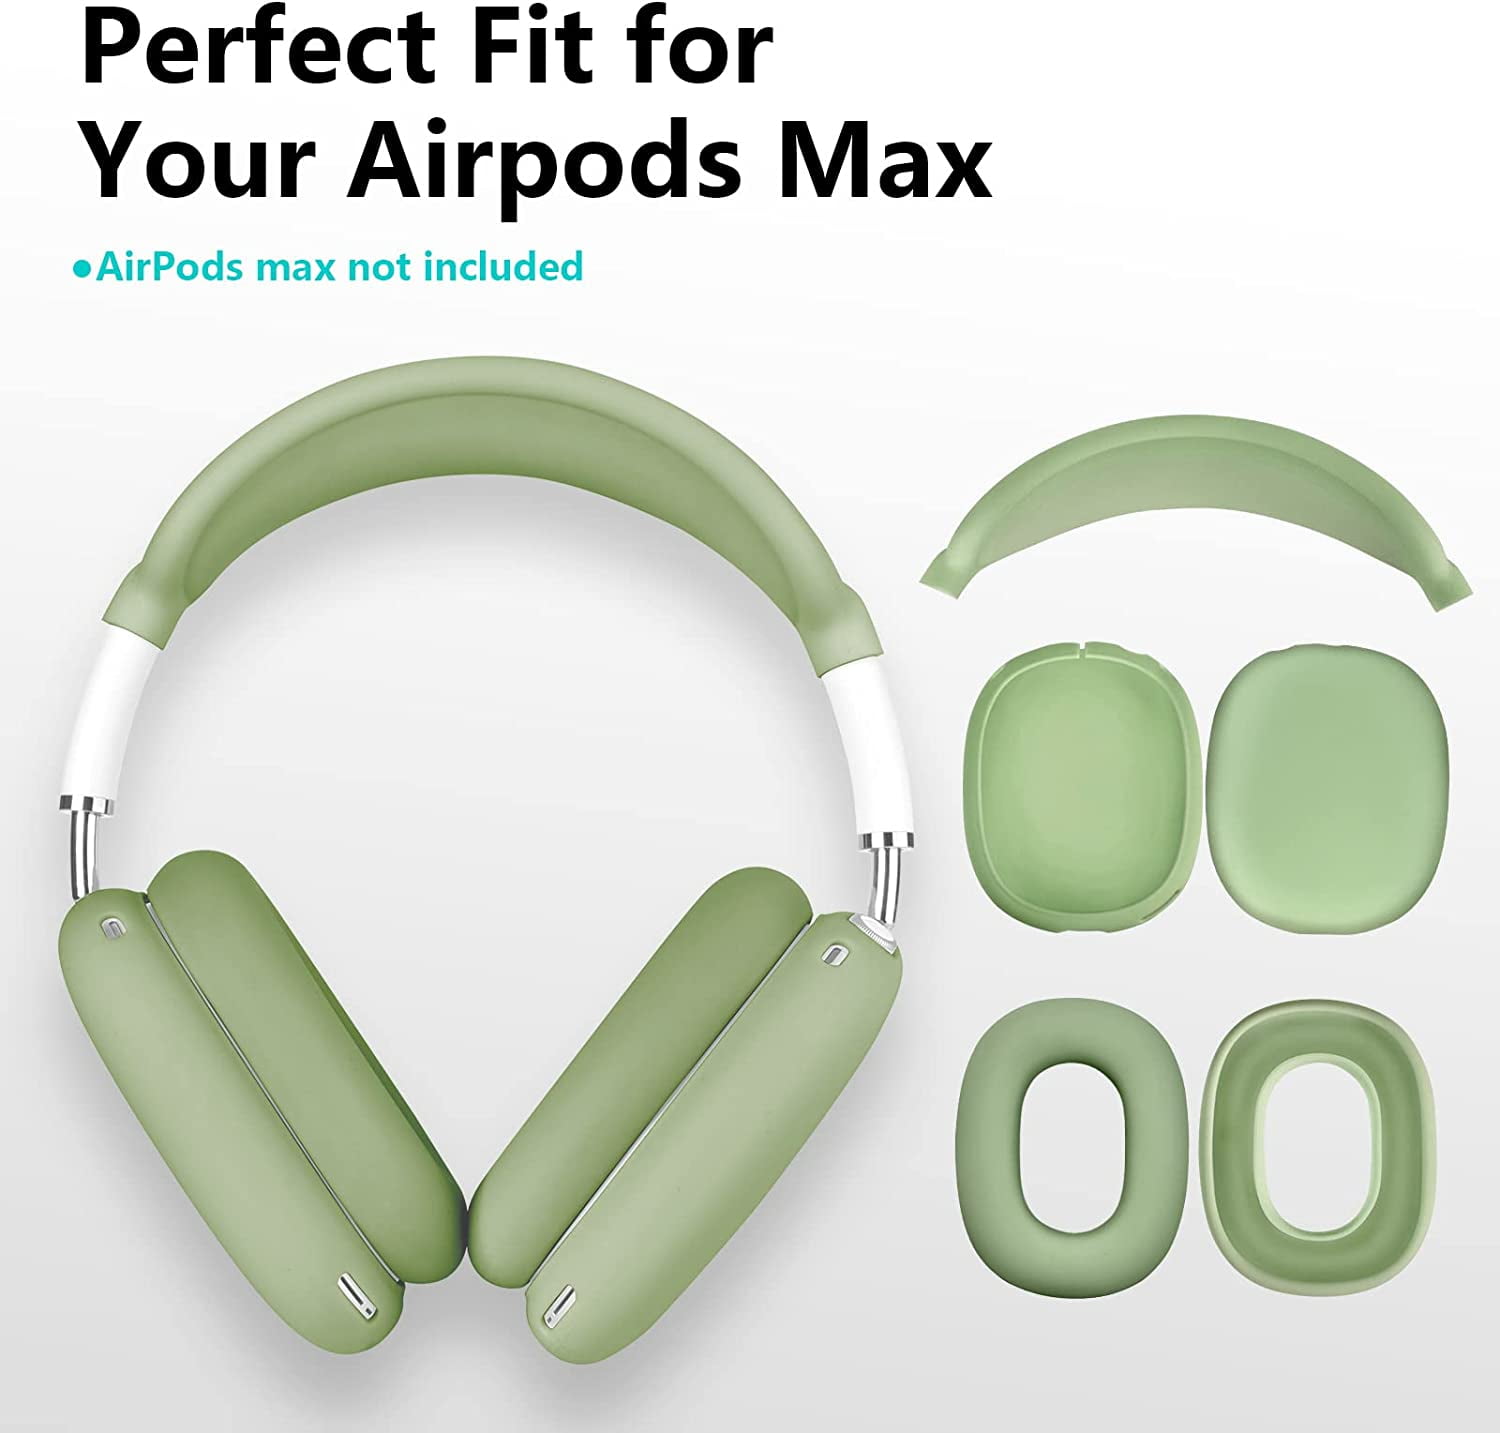 Walmart is offering markdowns on AirPods Pro, AirPods Max this